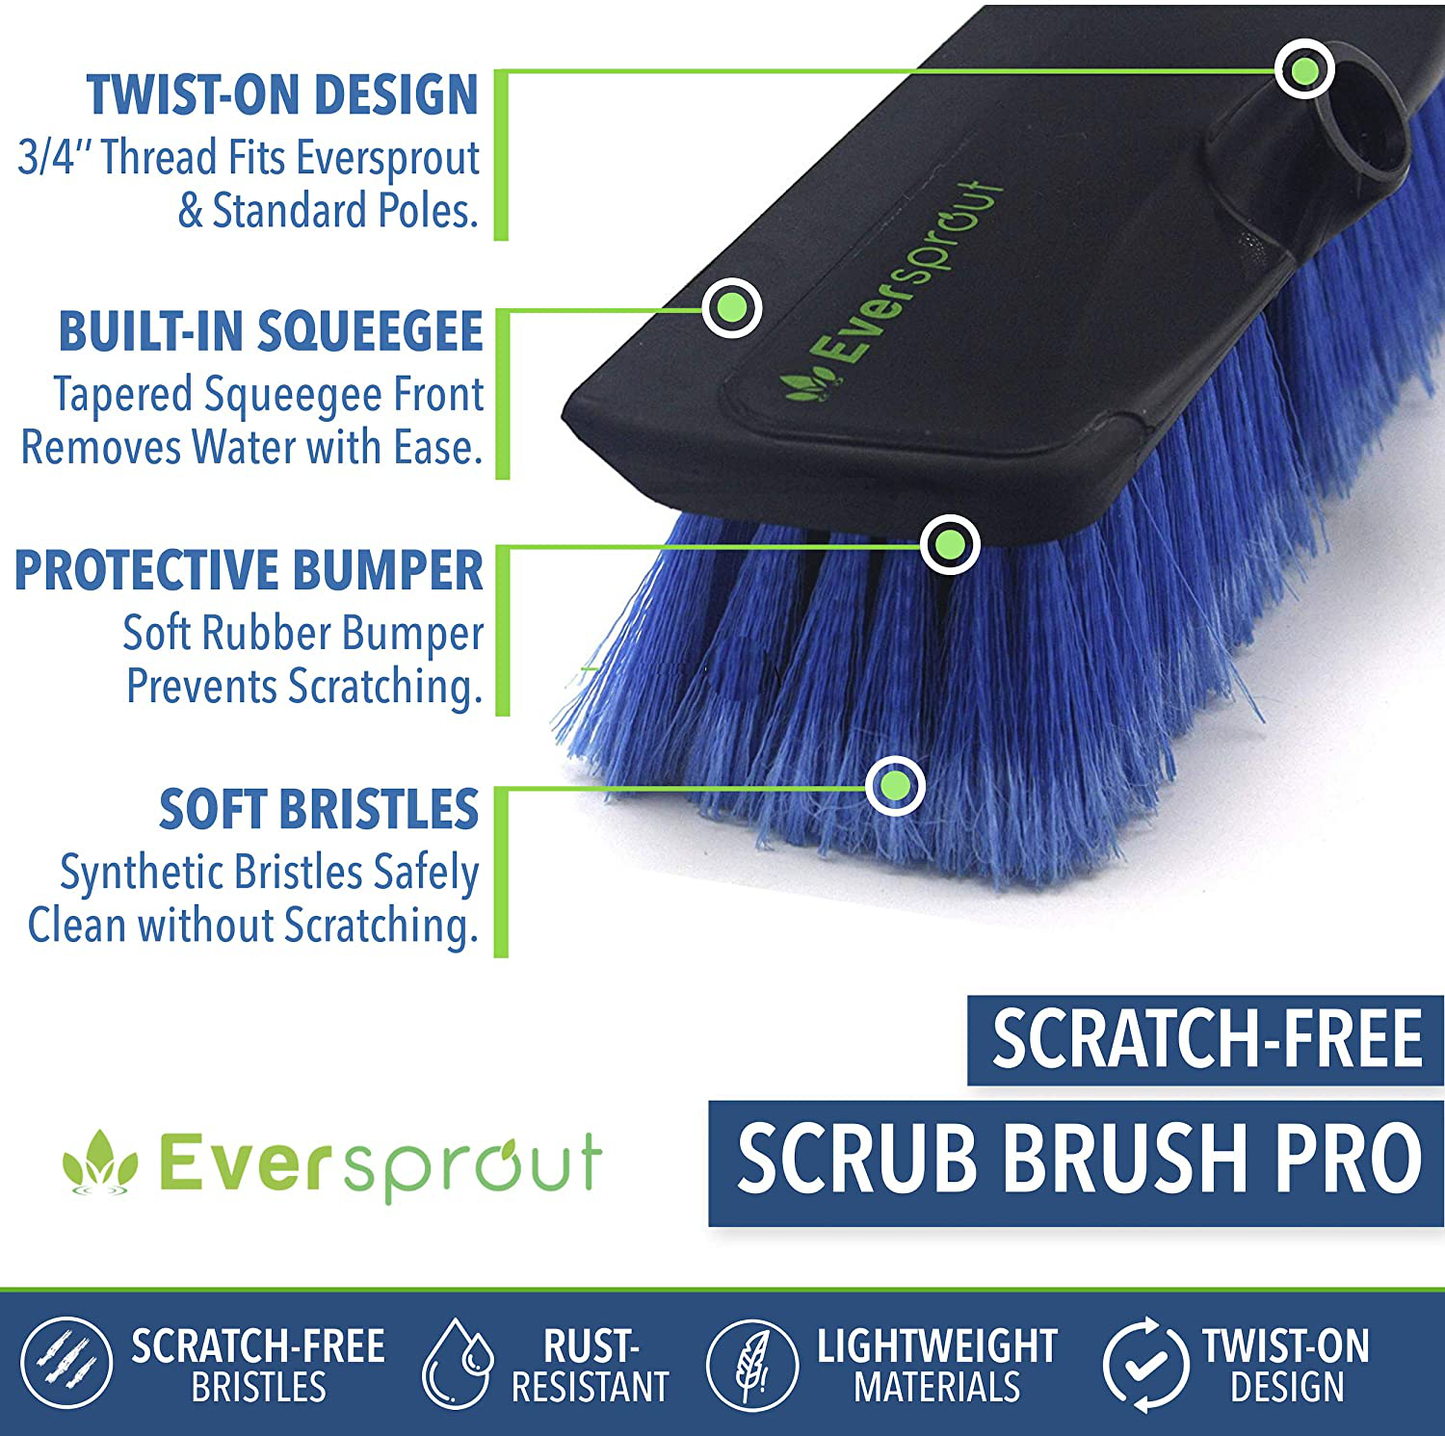 EVERSPROUT 1.5-to-3.5 Foot Scrub Brush | Built-in Rubber Bumper | Lightweight Extension Pole Handle | Soft Bristles wash Car, RV, Boat, Solar Panel, Deck | No Scratch Brush